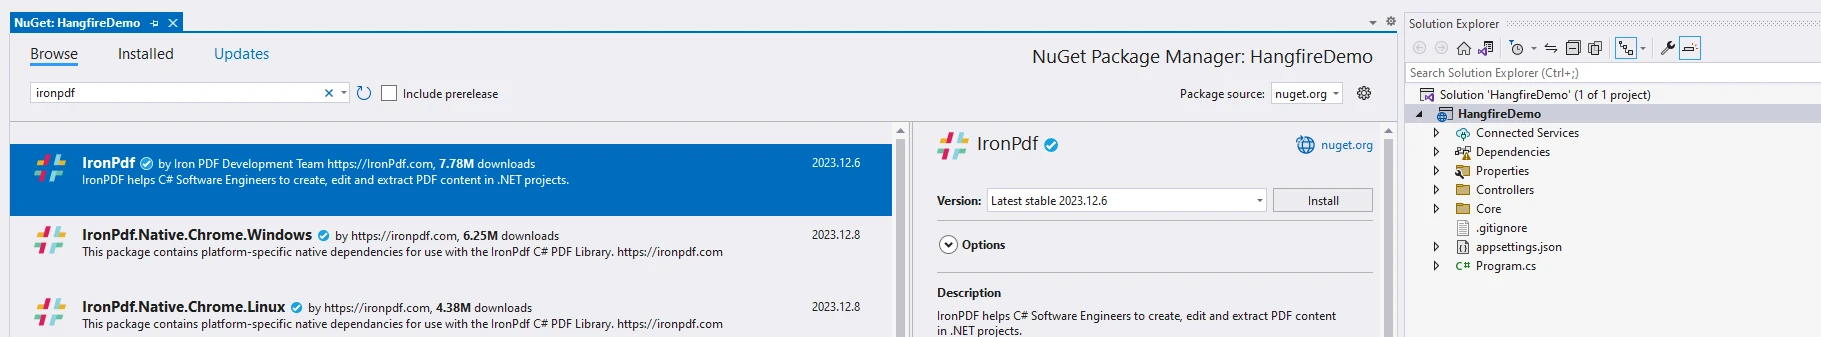 C# Pattern Matching Expressions (How It Works For Developers): Figure 1 - Installing IronPDF with the NuGet package manager